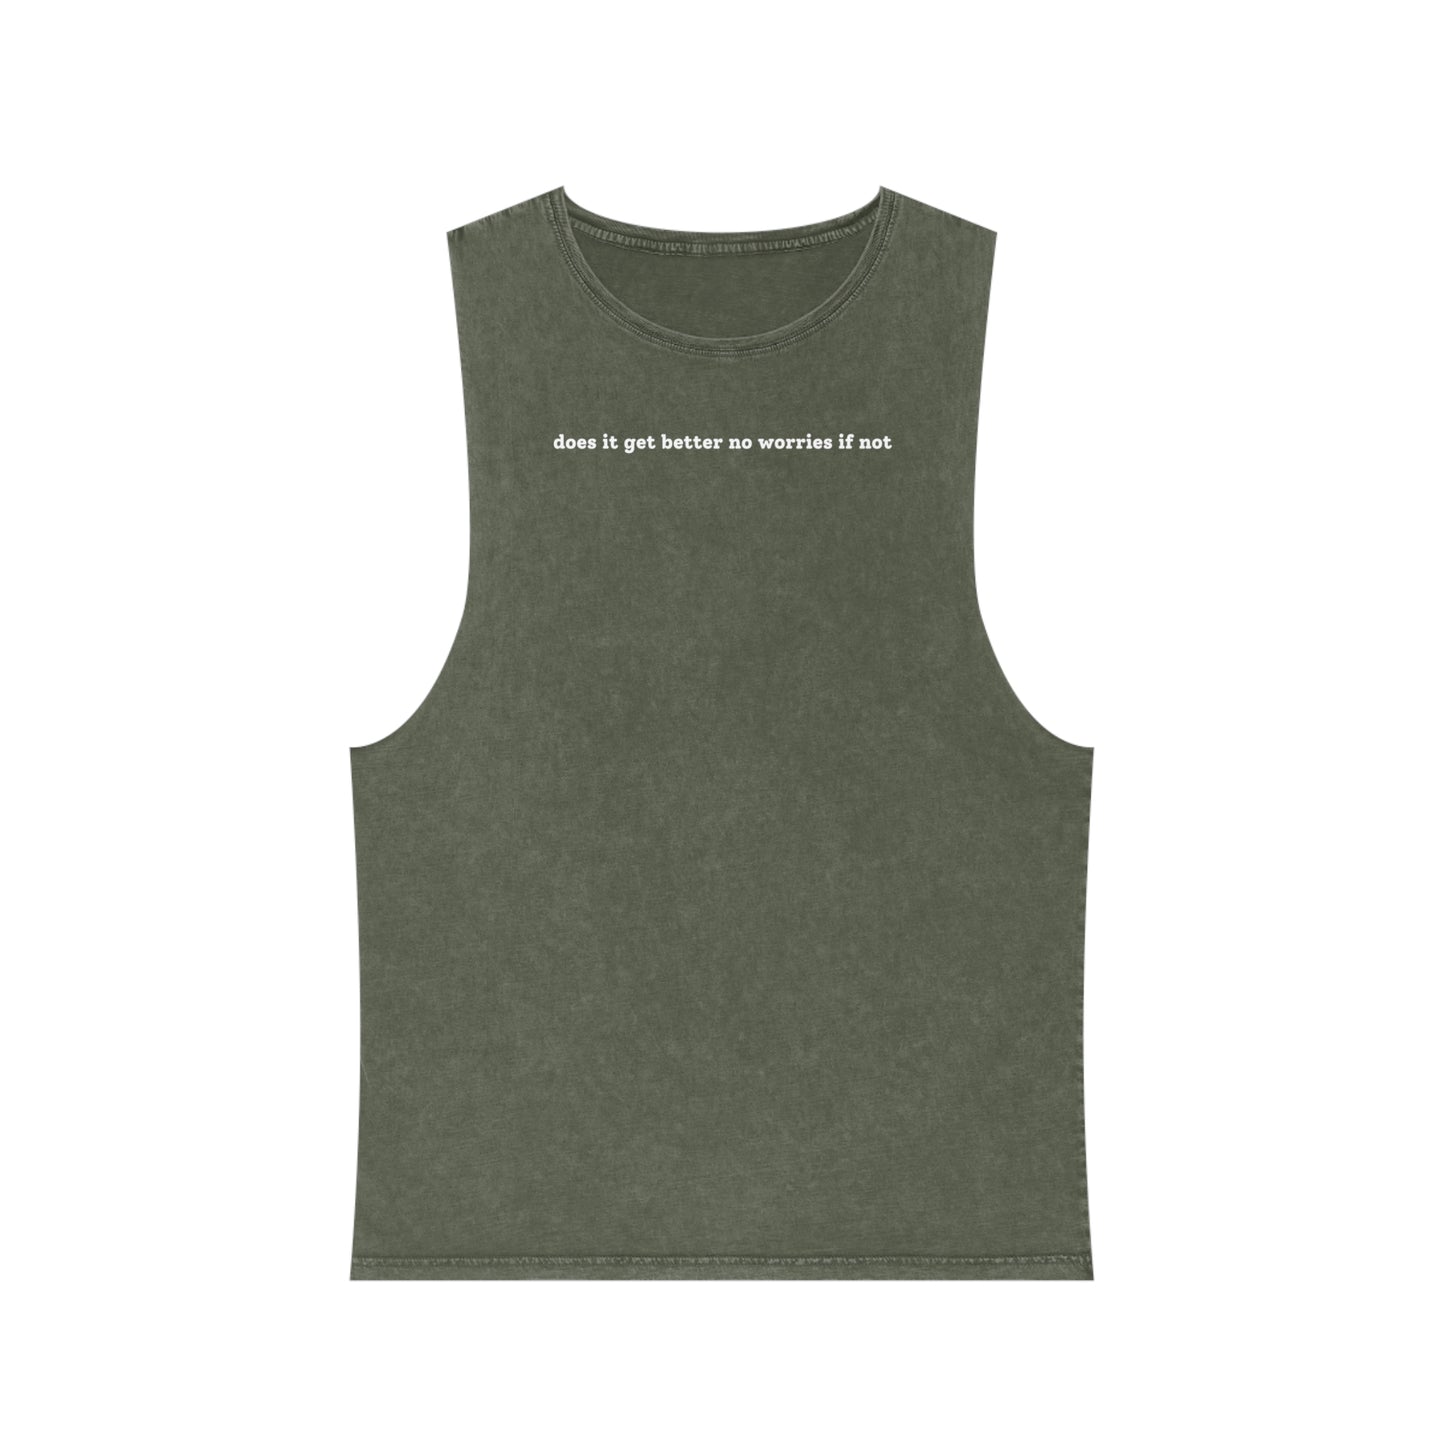 Does It Get Better No Worries If Not - Stonewash Tank Top